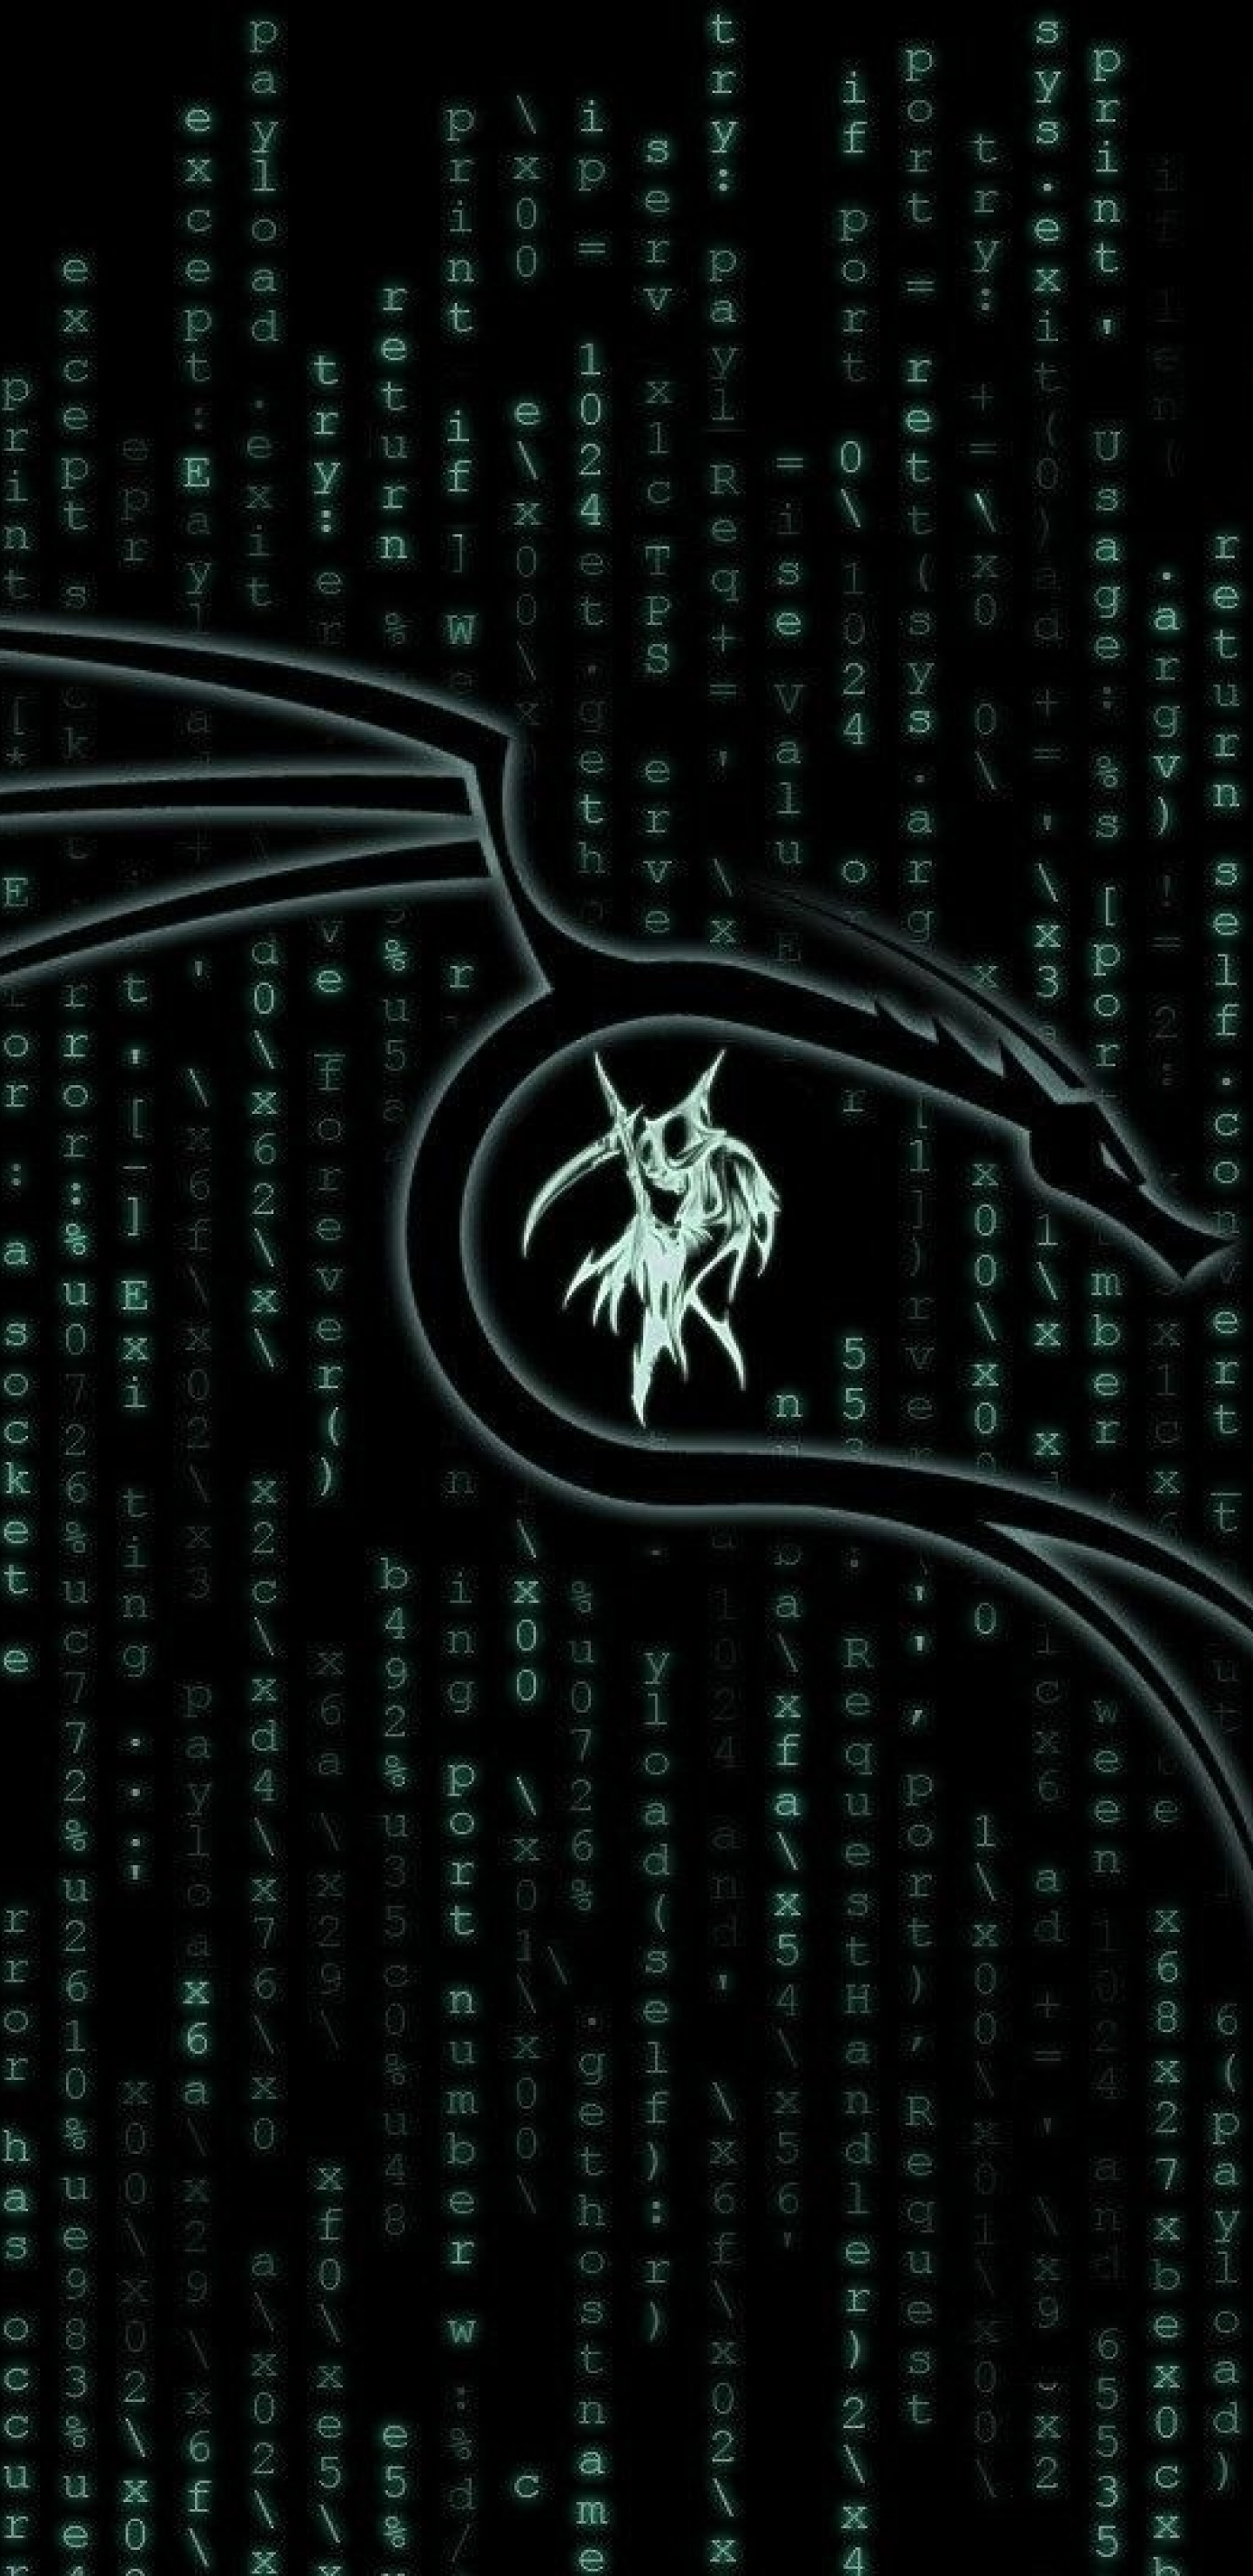 1440x2960 Kali Linux Matrix Samsung Galaxy Note 9 8 S9 S8 S8 Qhd Wallpaper Hd Hi Tech 4k Wallpapers Images Photos And Background Wallpapers Den